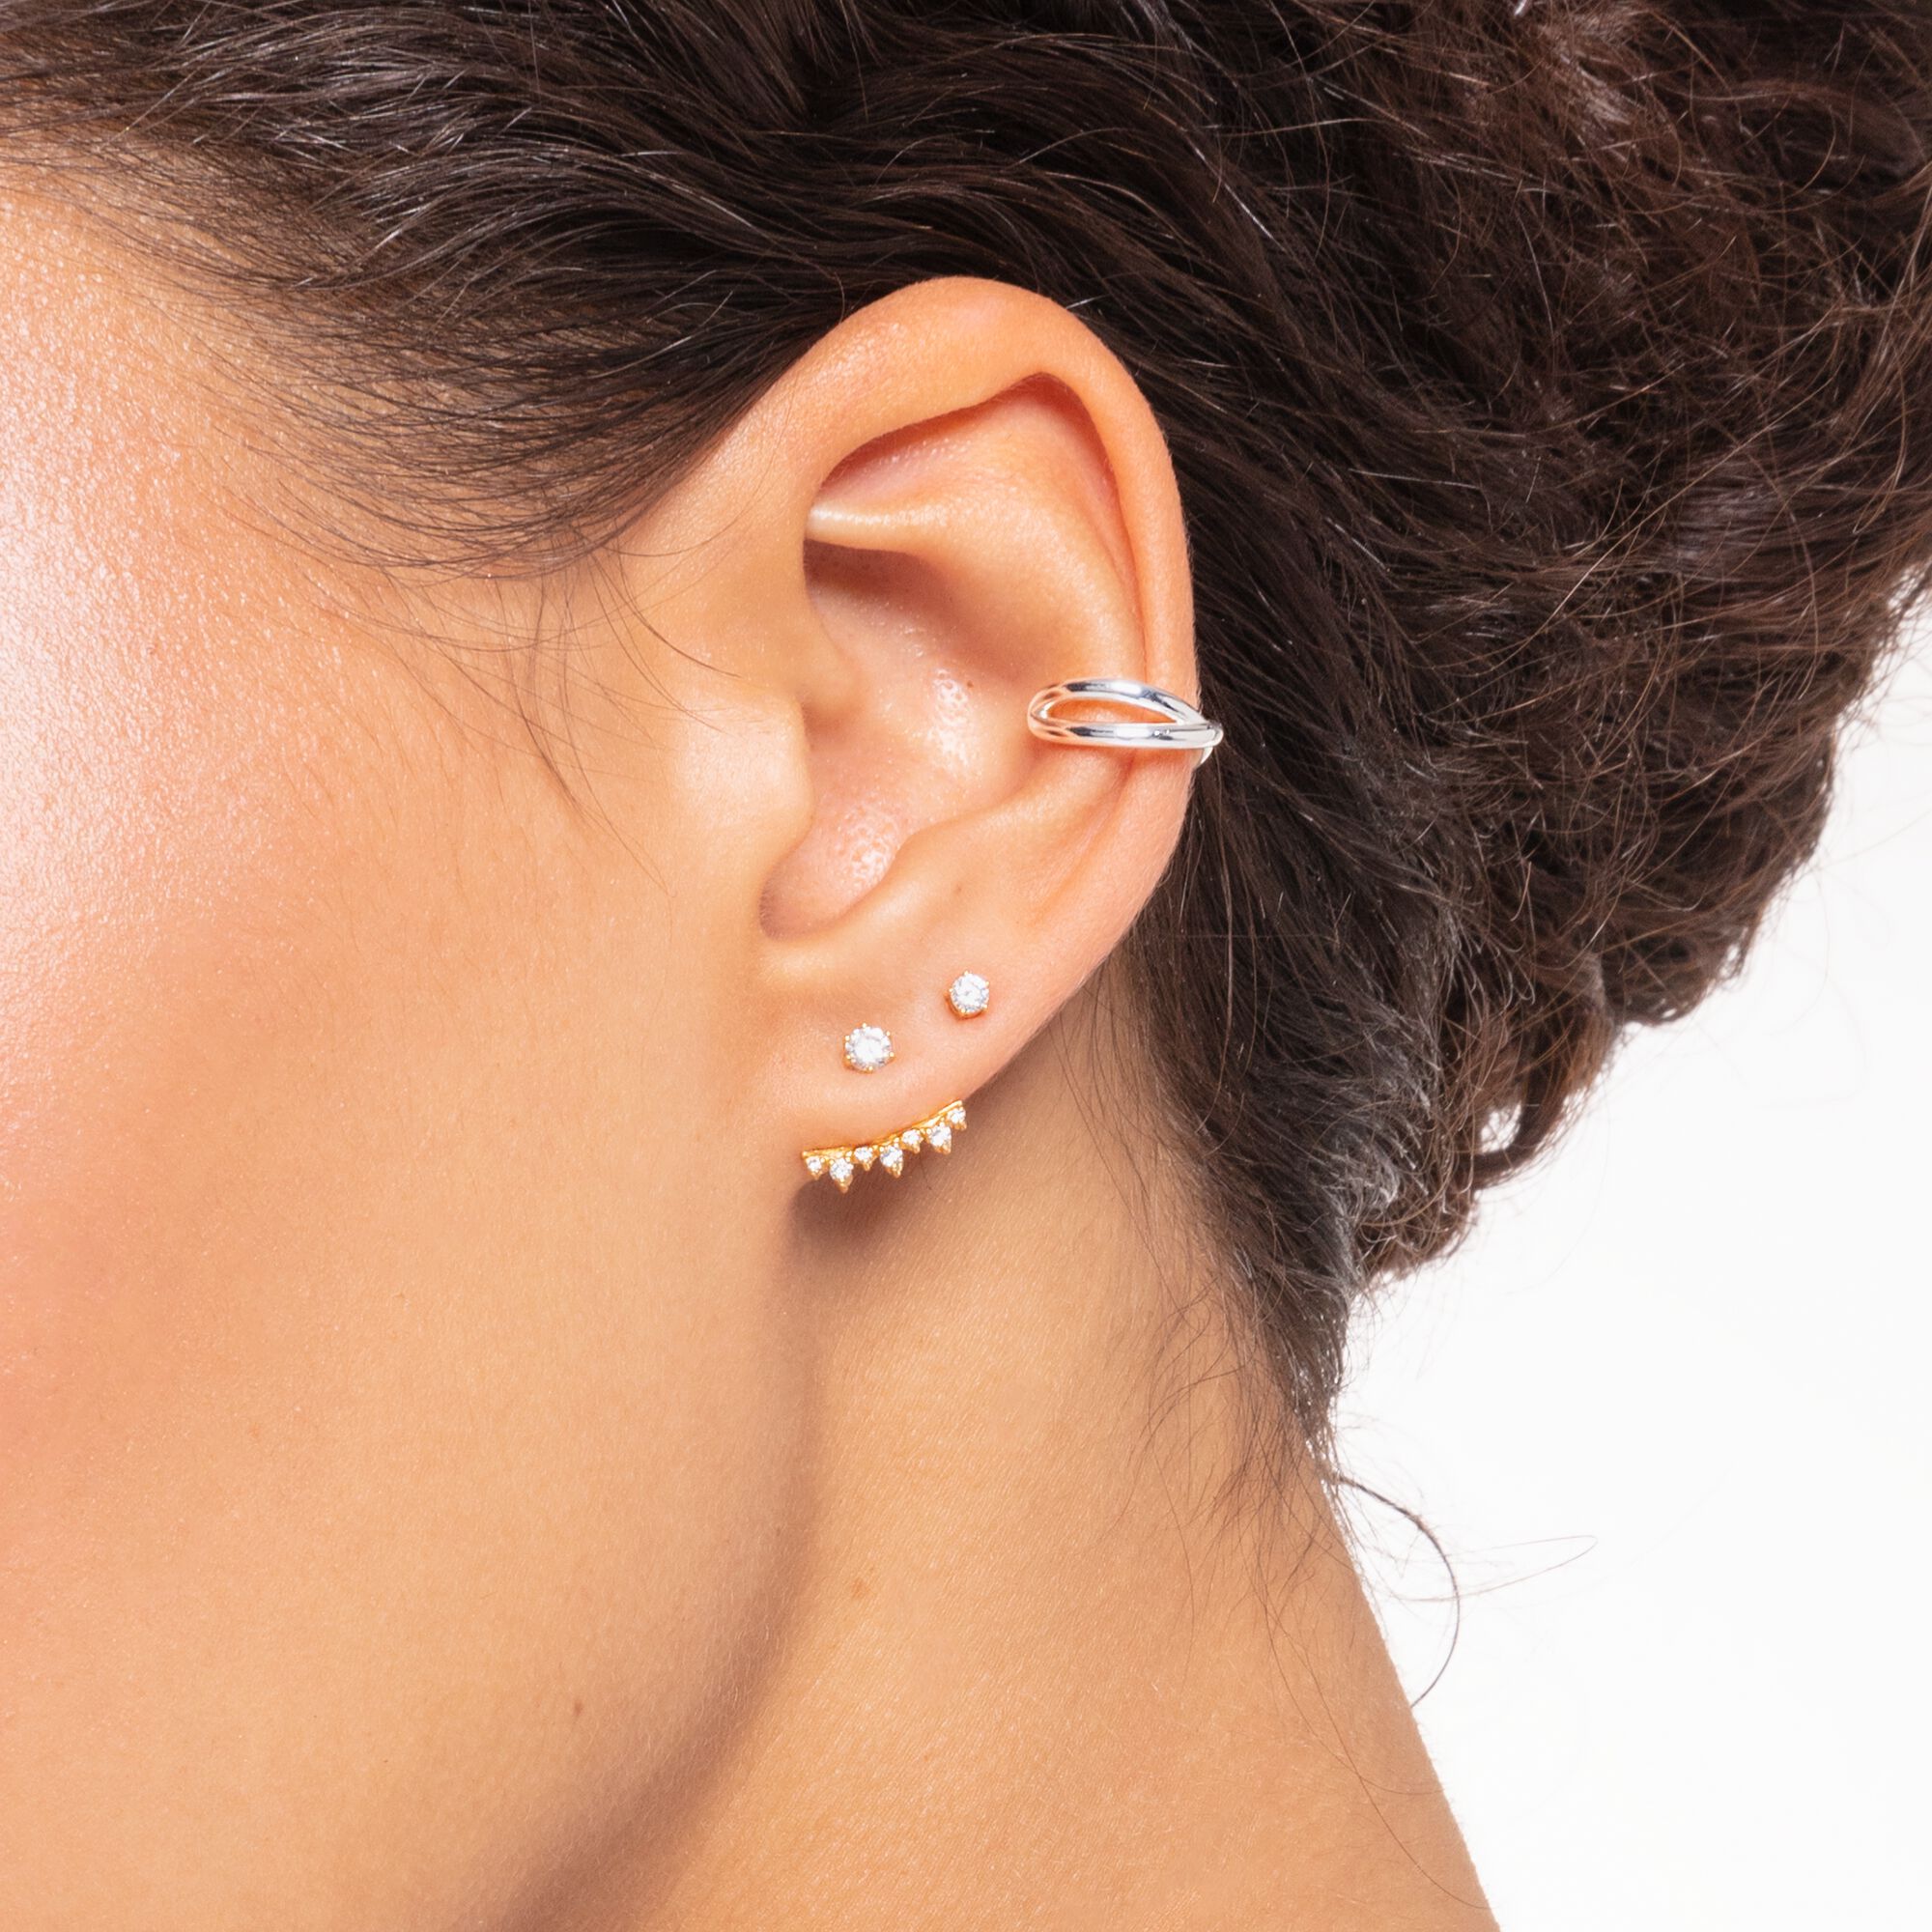 & gold in THOMAS earring Ear jacket SABO │ vintage-inspired